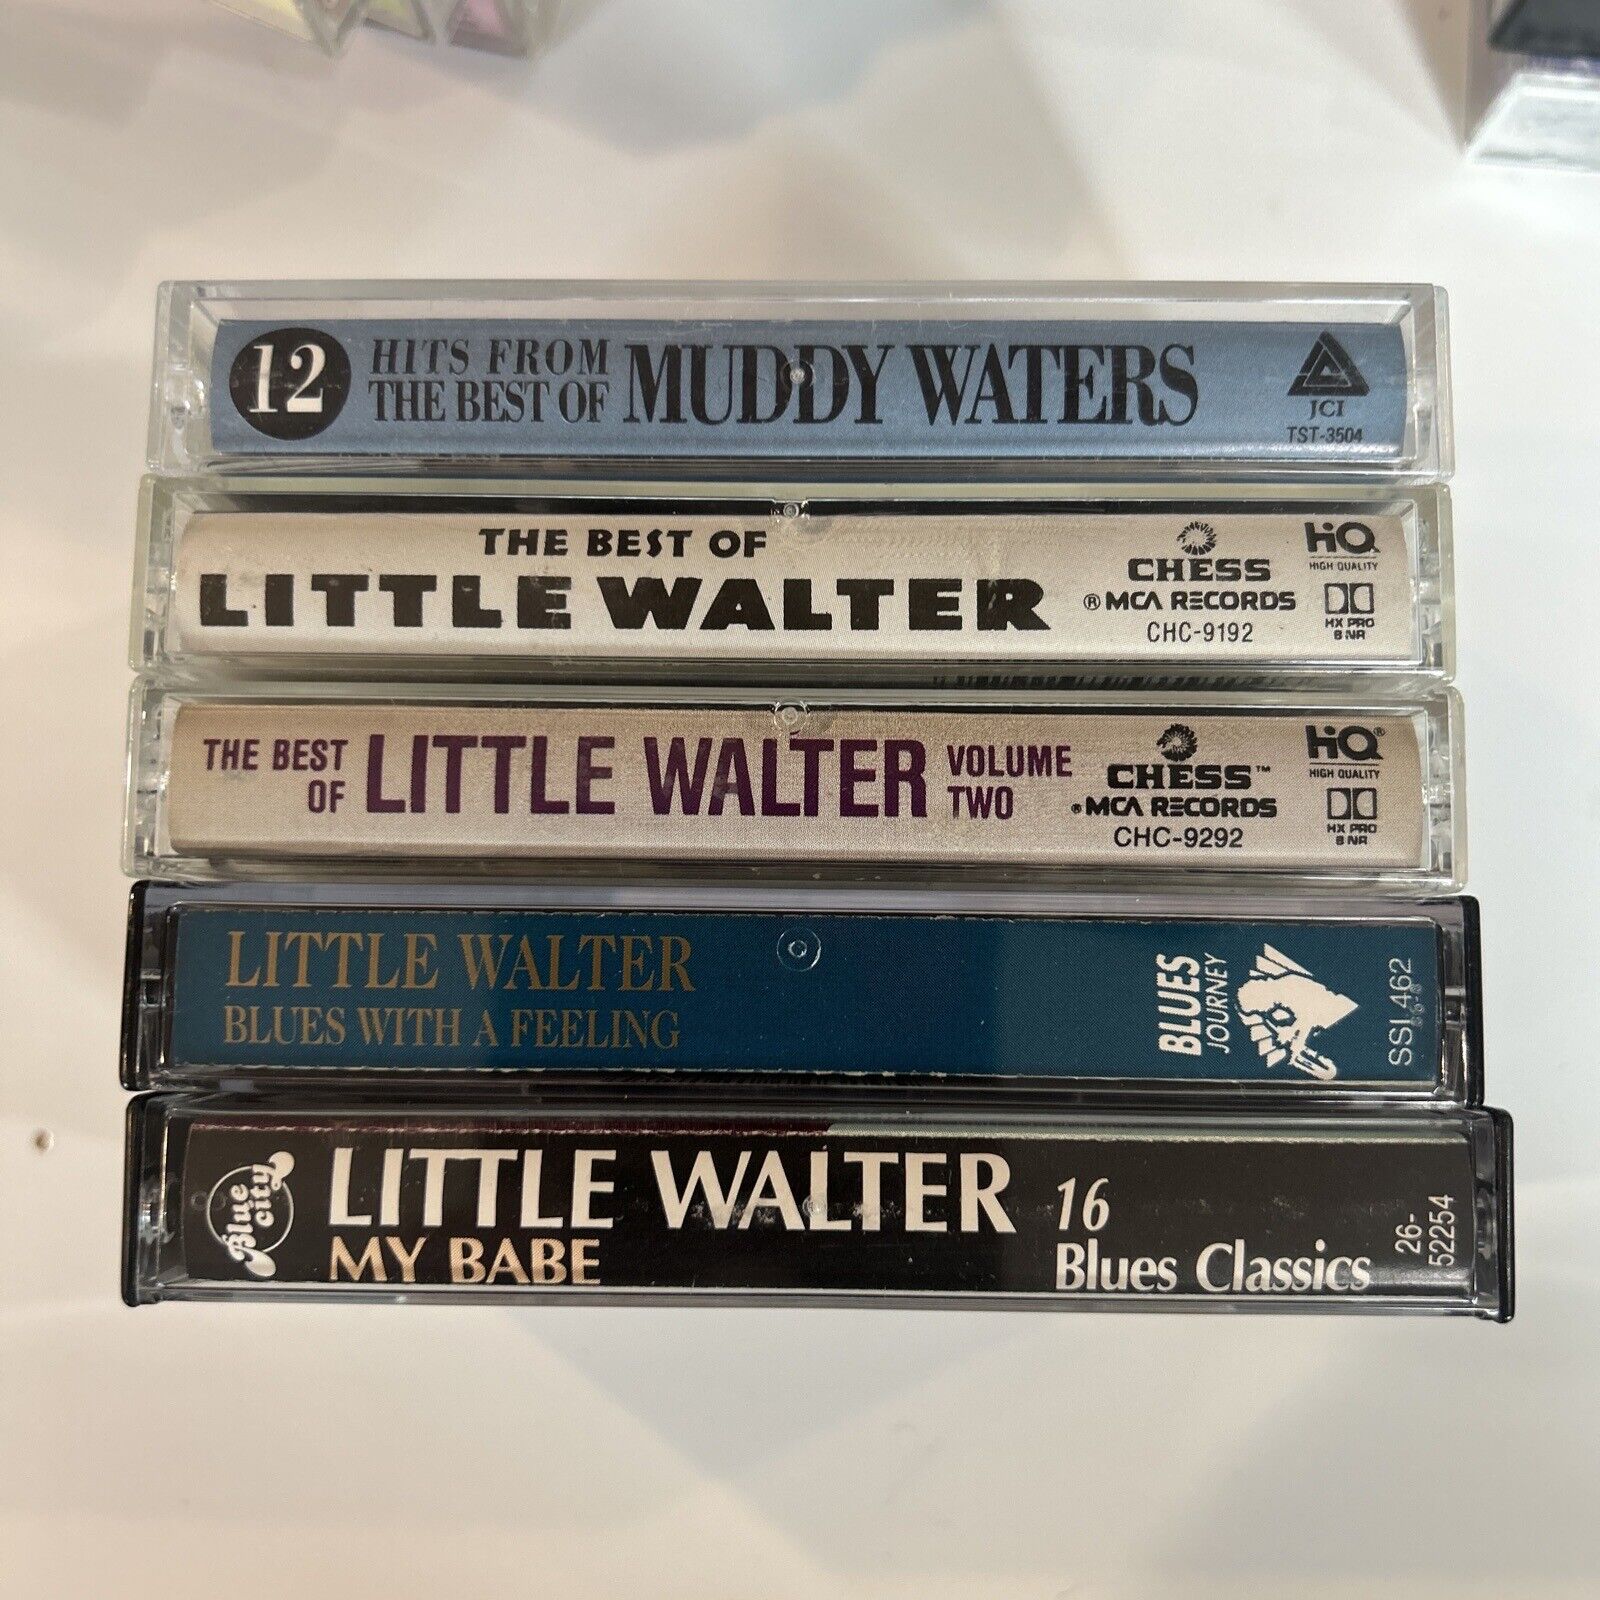 Cassettes LITTLE WALTER LOT Of 5 Muddy Waters Blues Harmonica Chicago Blues